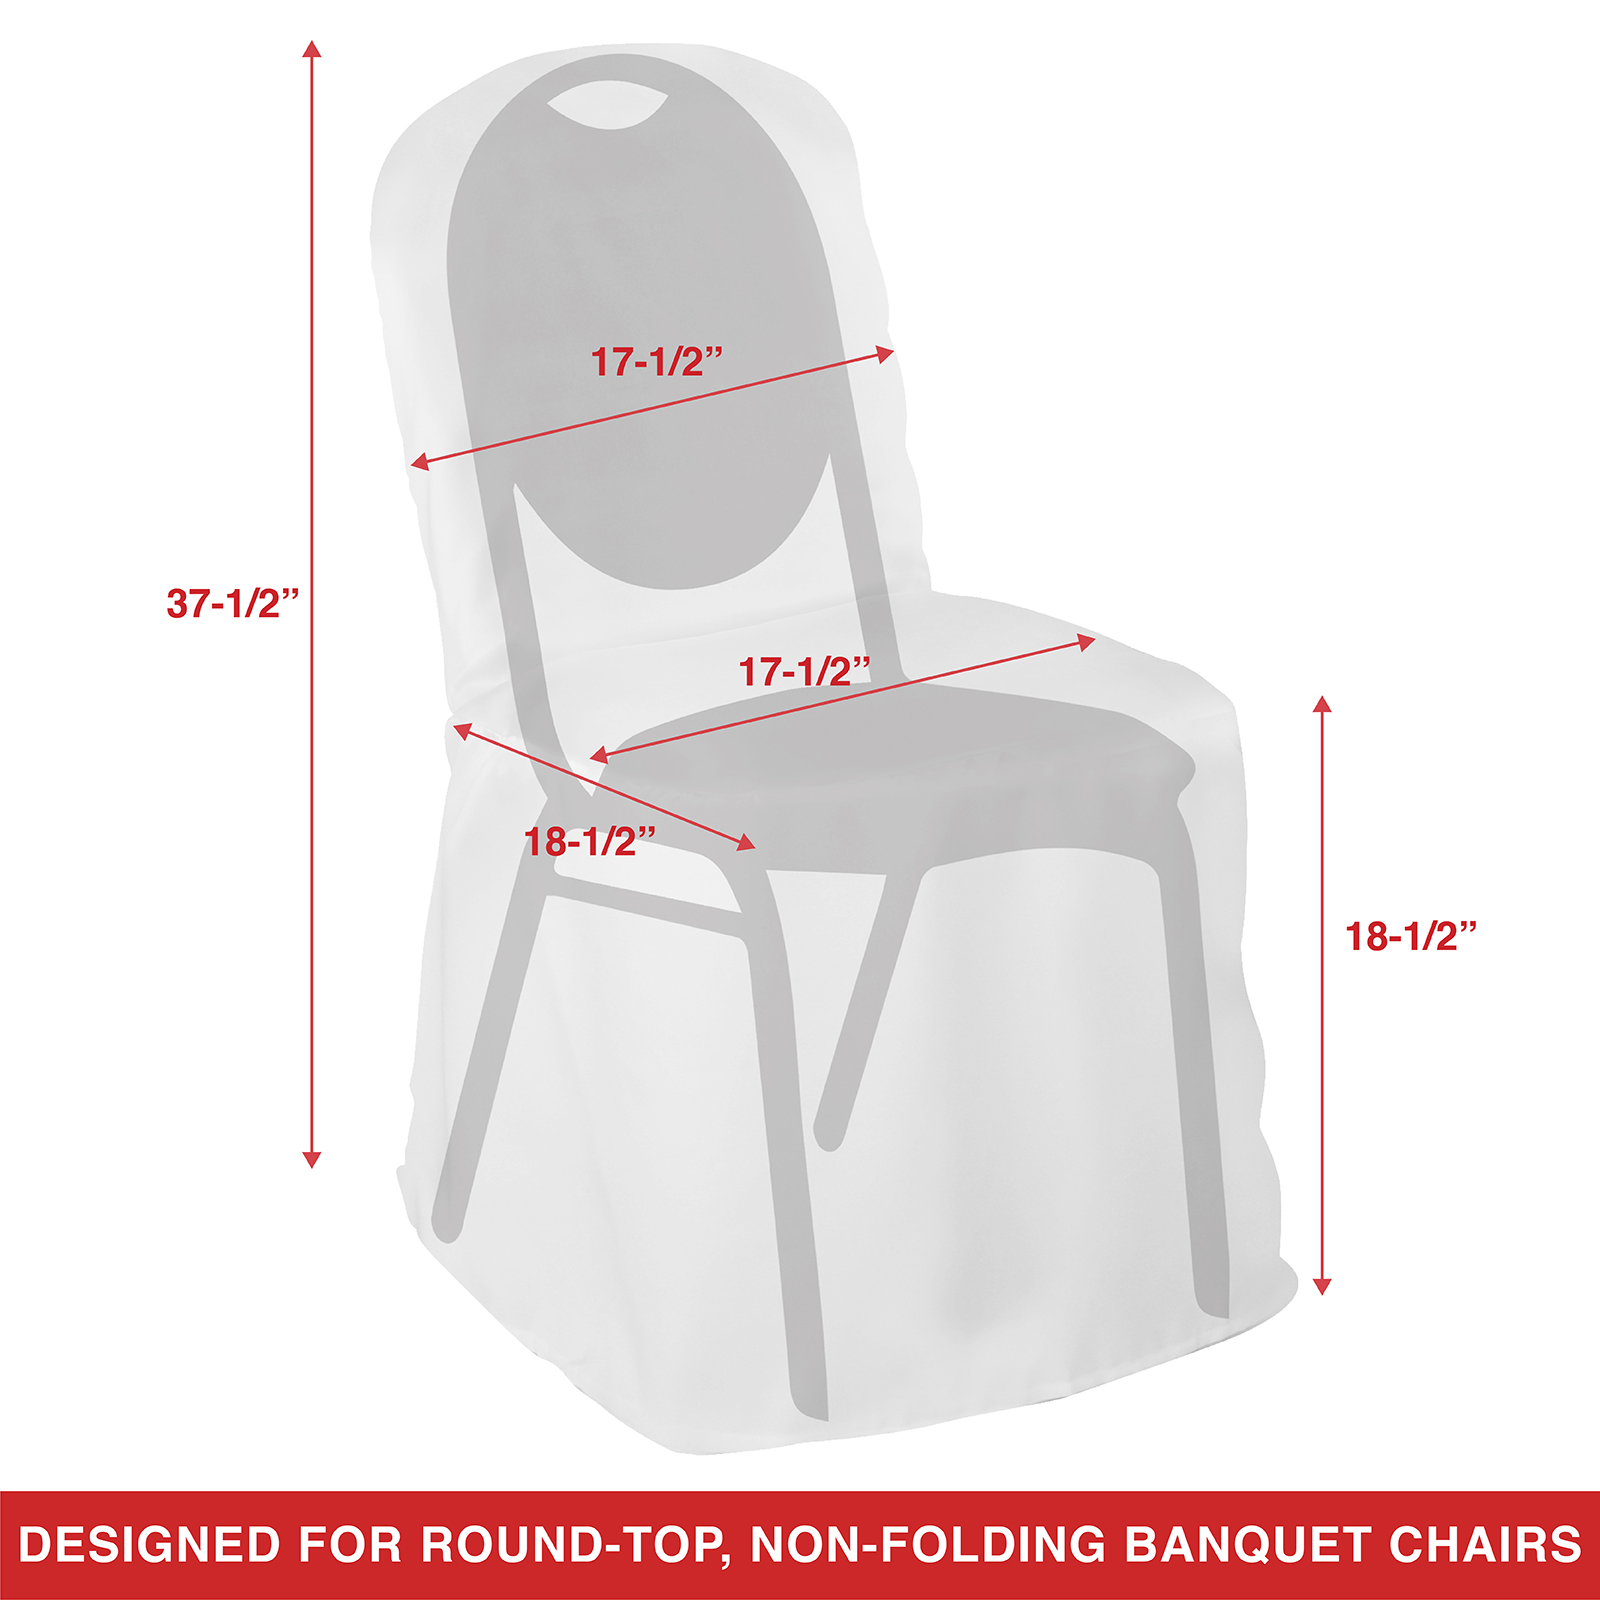 Lann's Linens 10 Wedding/Party Banquet Chair Covers - Polyester Cloth